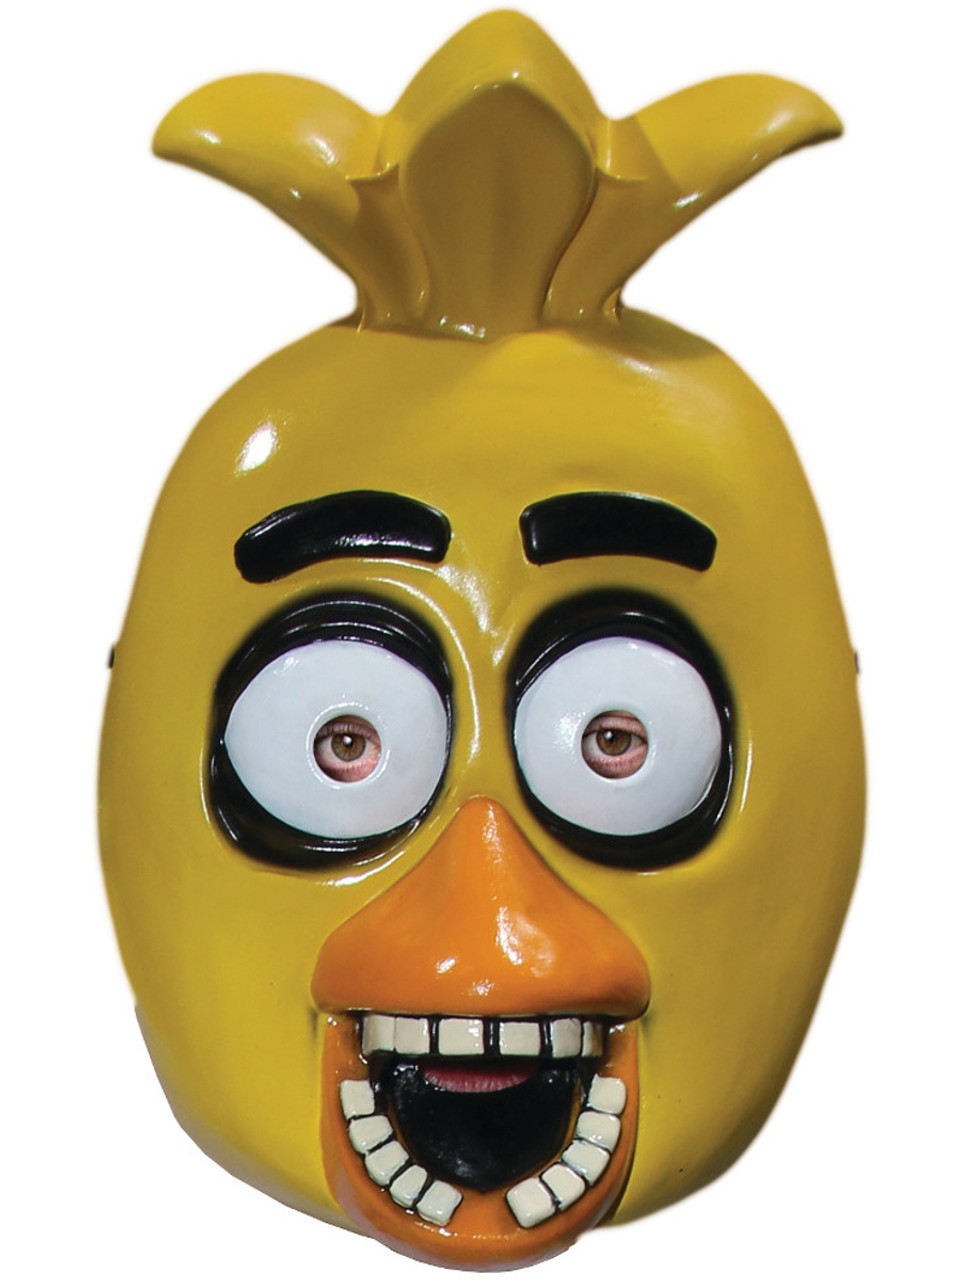 Withered Chica Mask (FNAF / Five Nights At Freddy’s)